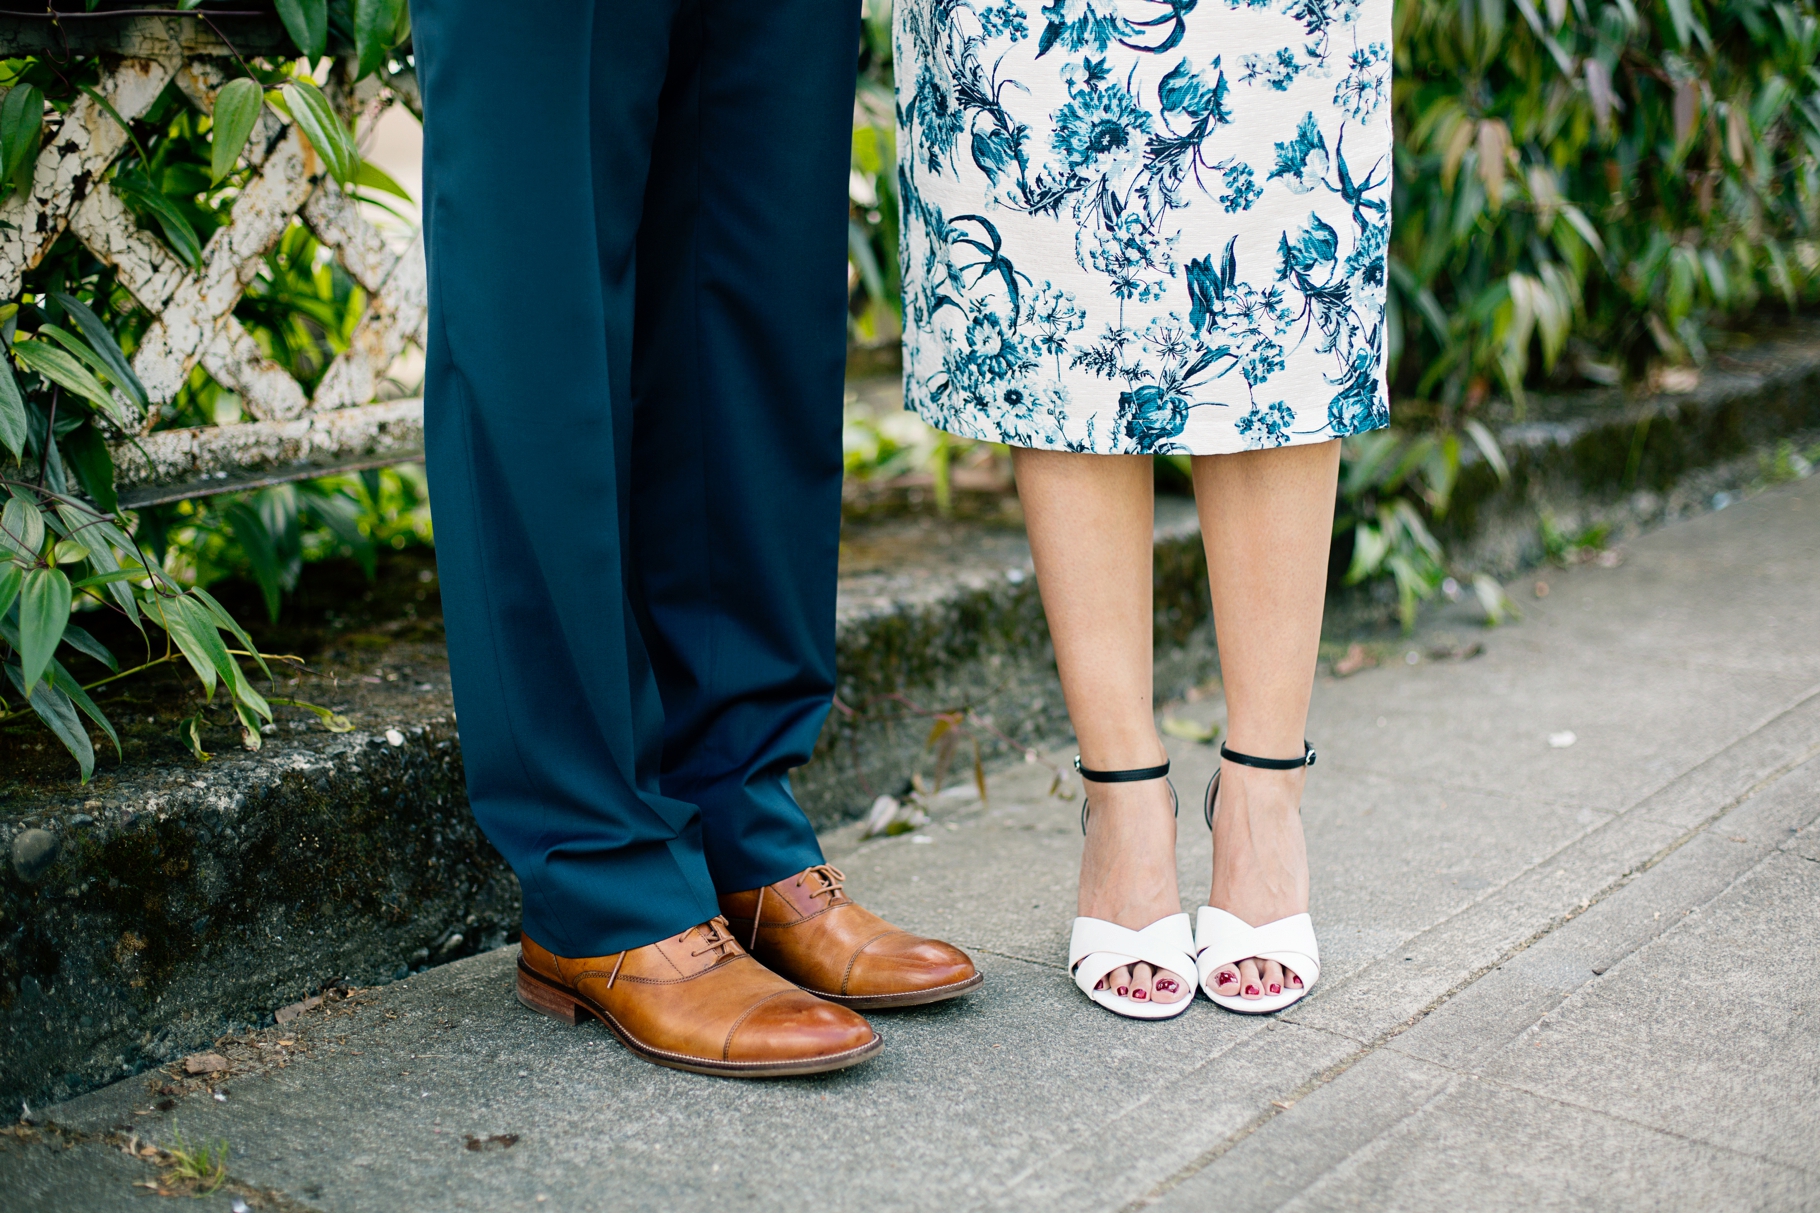 9-Bride-Groom-Shoes-King-Street-Staion-Pioneer-Square-Seattle-Wedding-Day-Photographer-Photography-by-Betty-Elaine